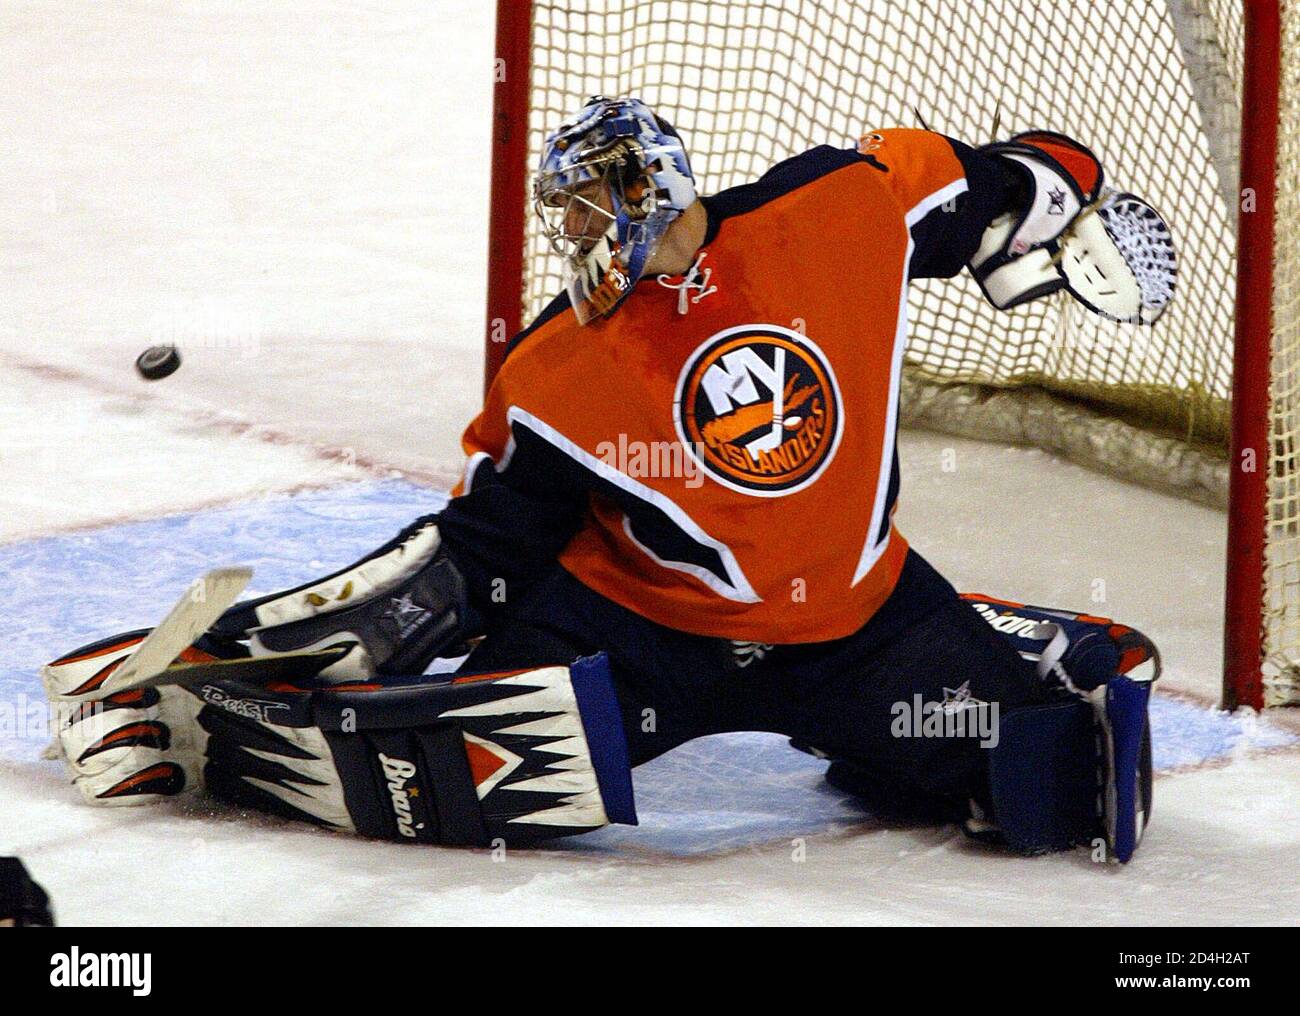 New York Islanders goalie Garth Snow makes a save against the Philadelphia  Flyers during first period NHL action in Philadelphia, Pennsylvania,  January 24, 2003. REUTERS/Beverly Schaefer BKS/ME Stock Photo - Alamy